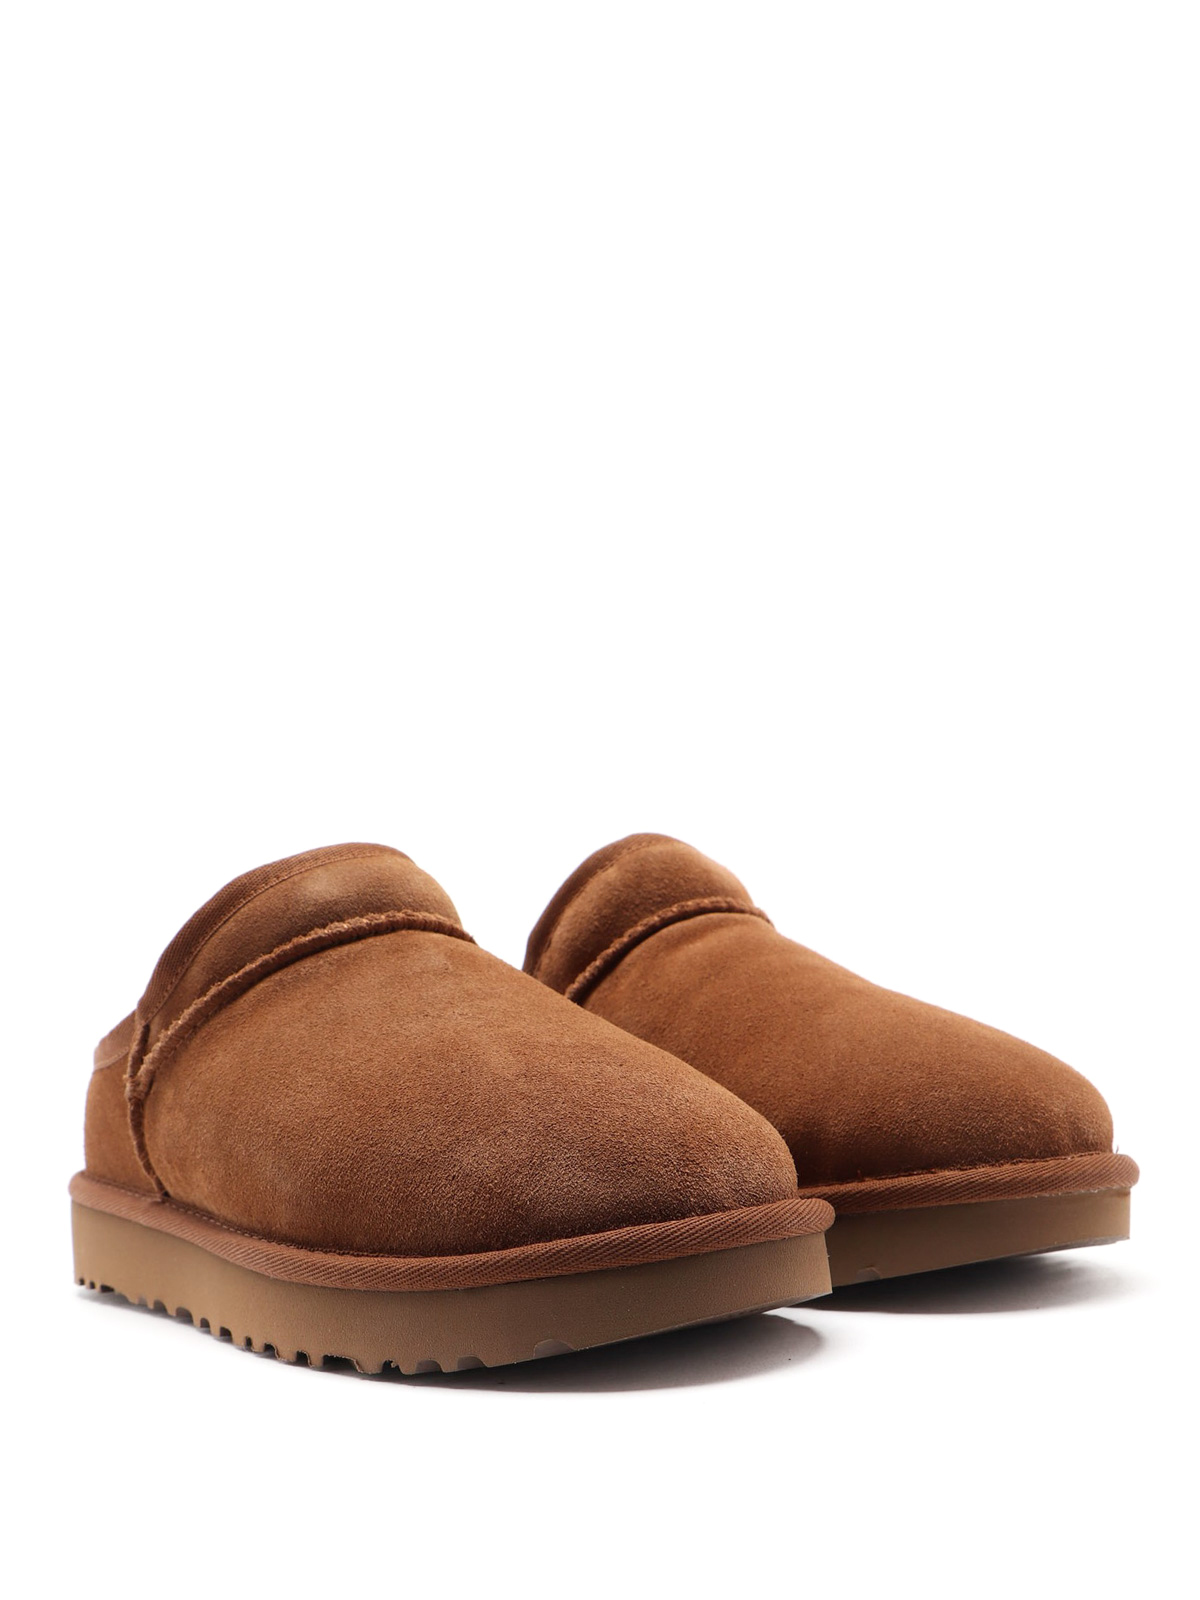 ugg slippers loafers